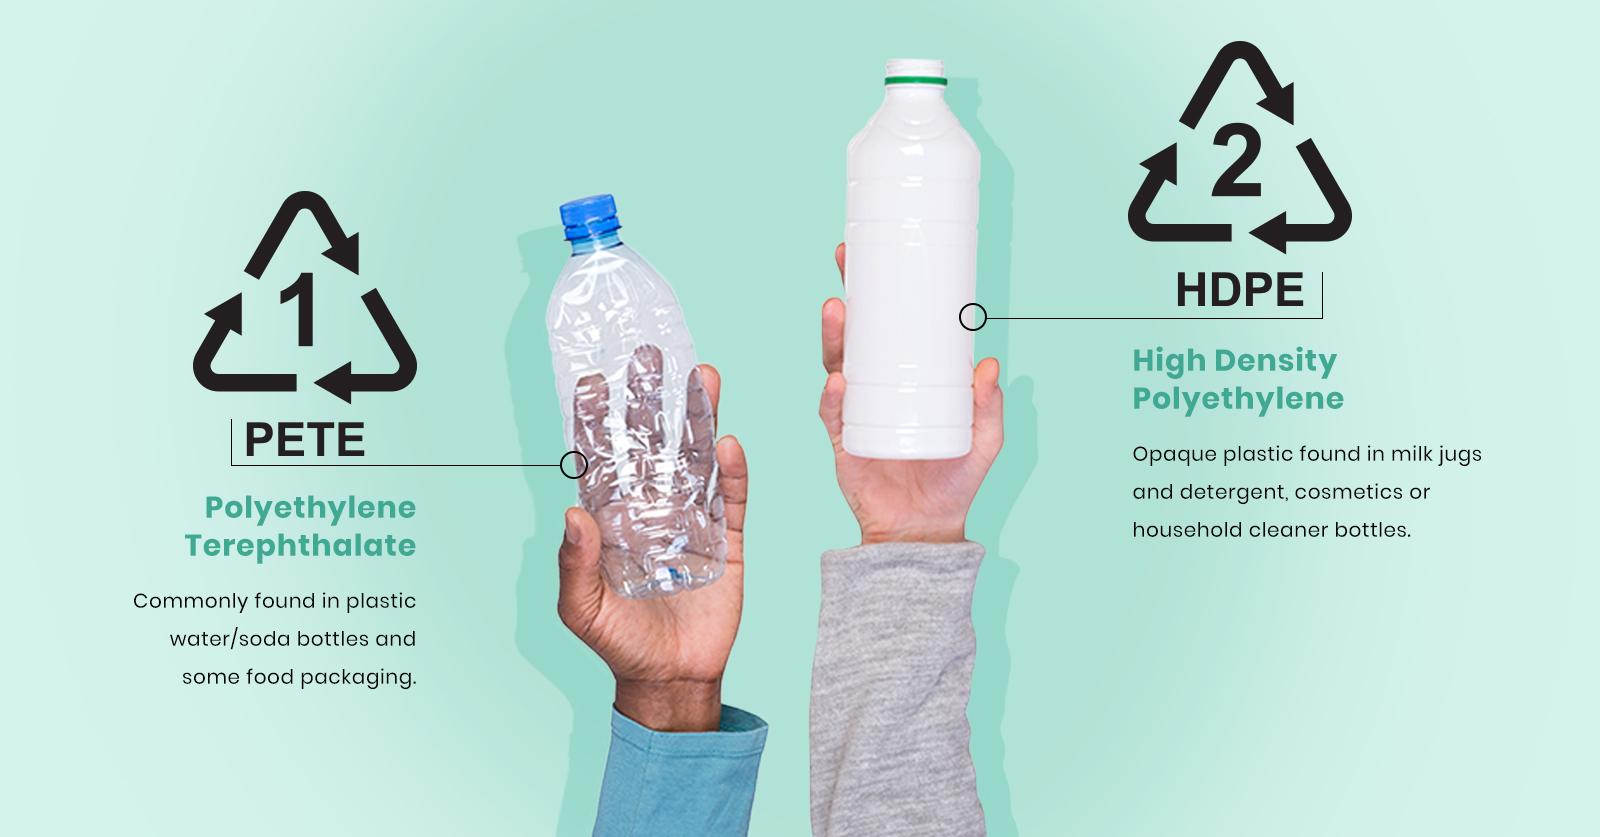 Products made from recycled plastic bottles - 5 examples